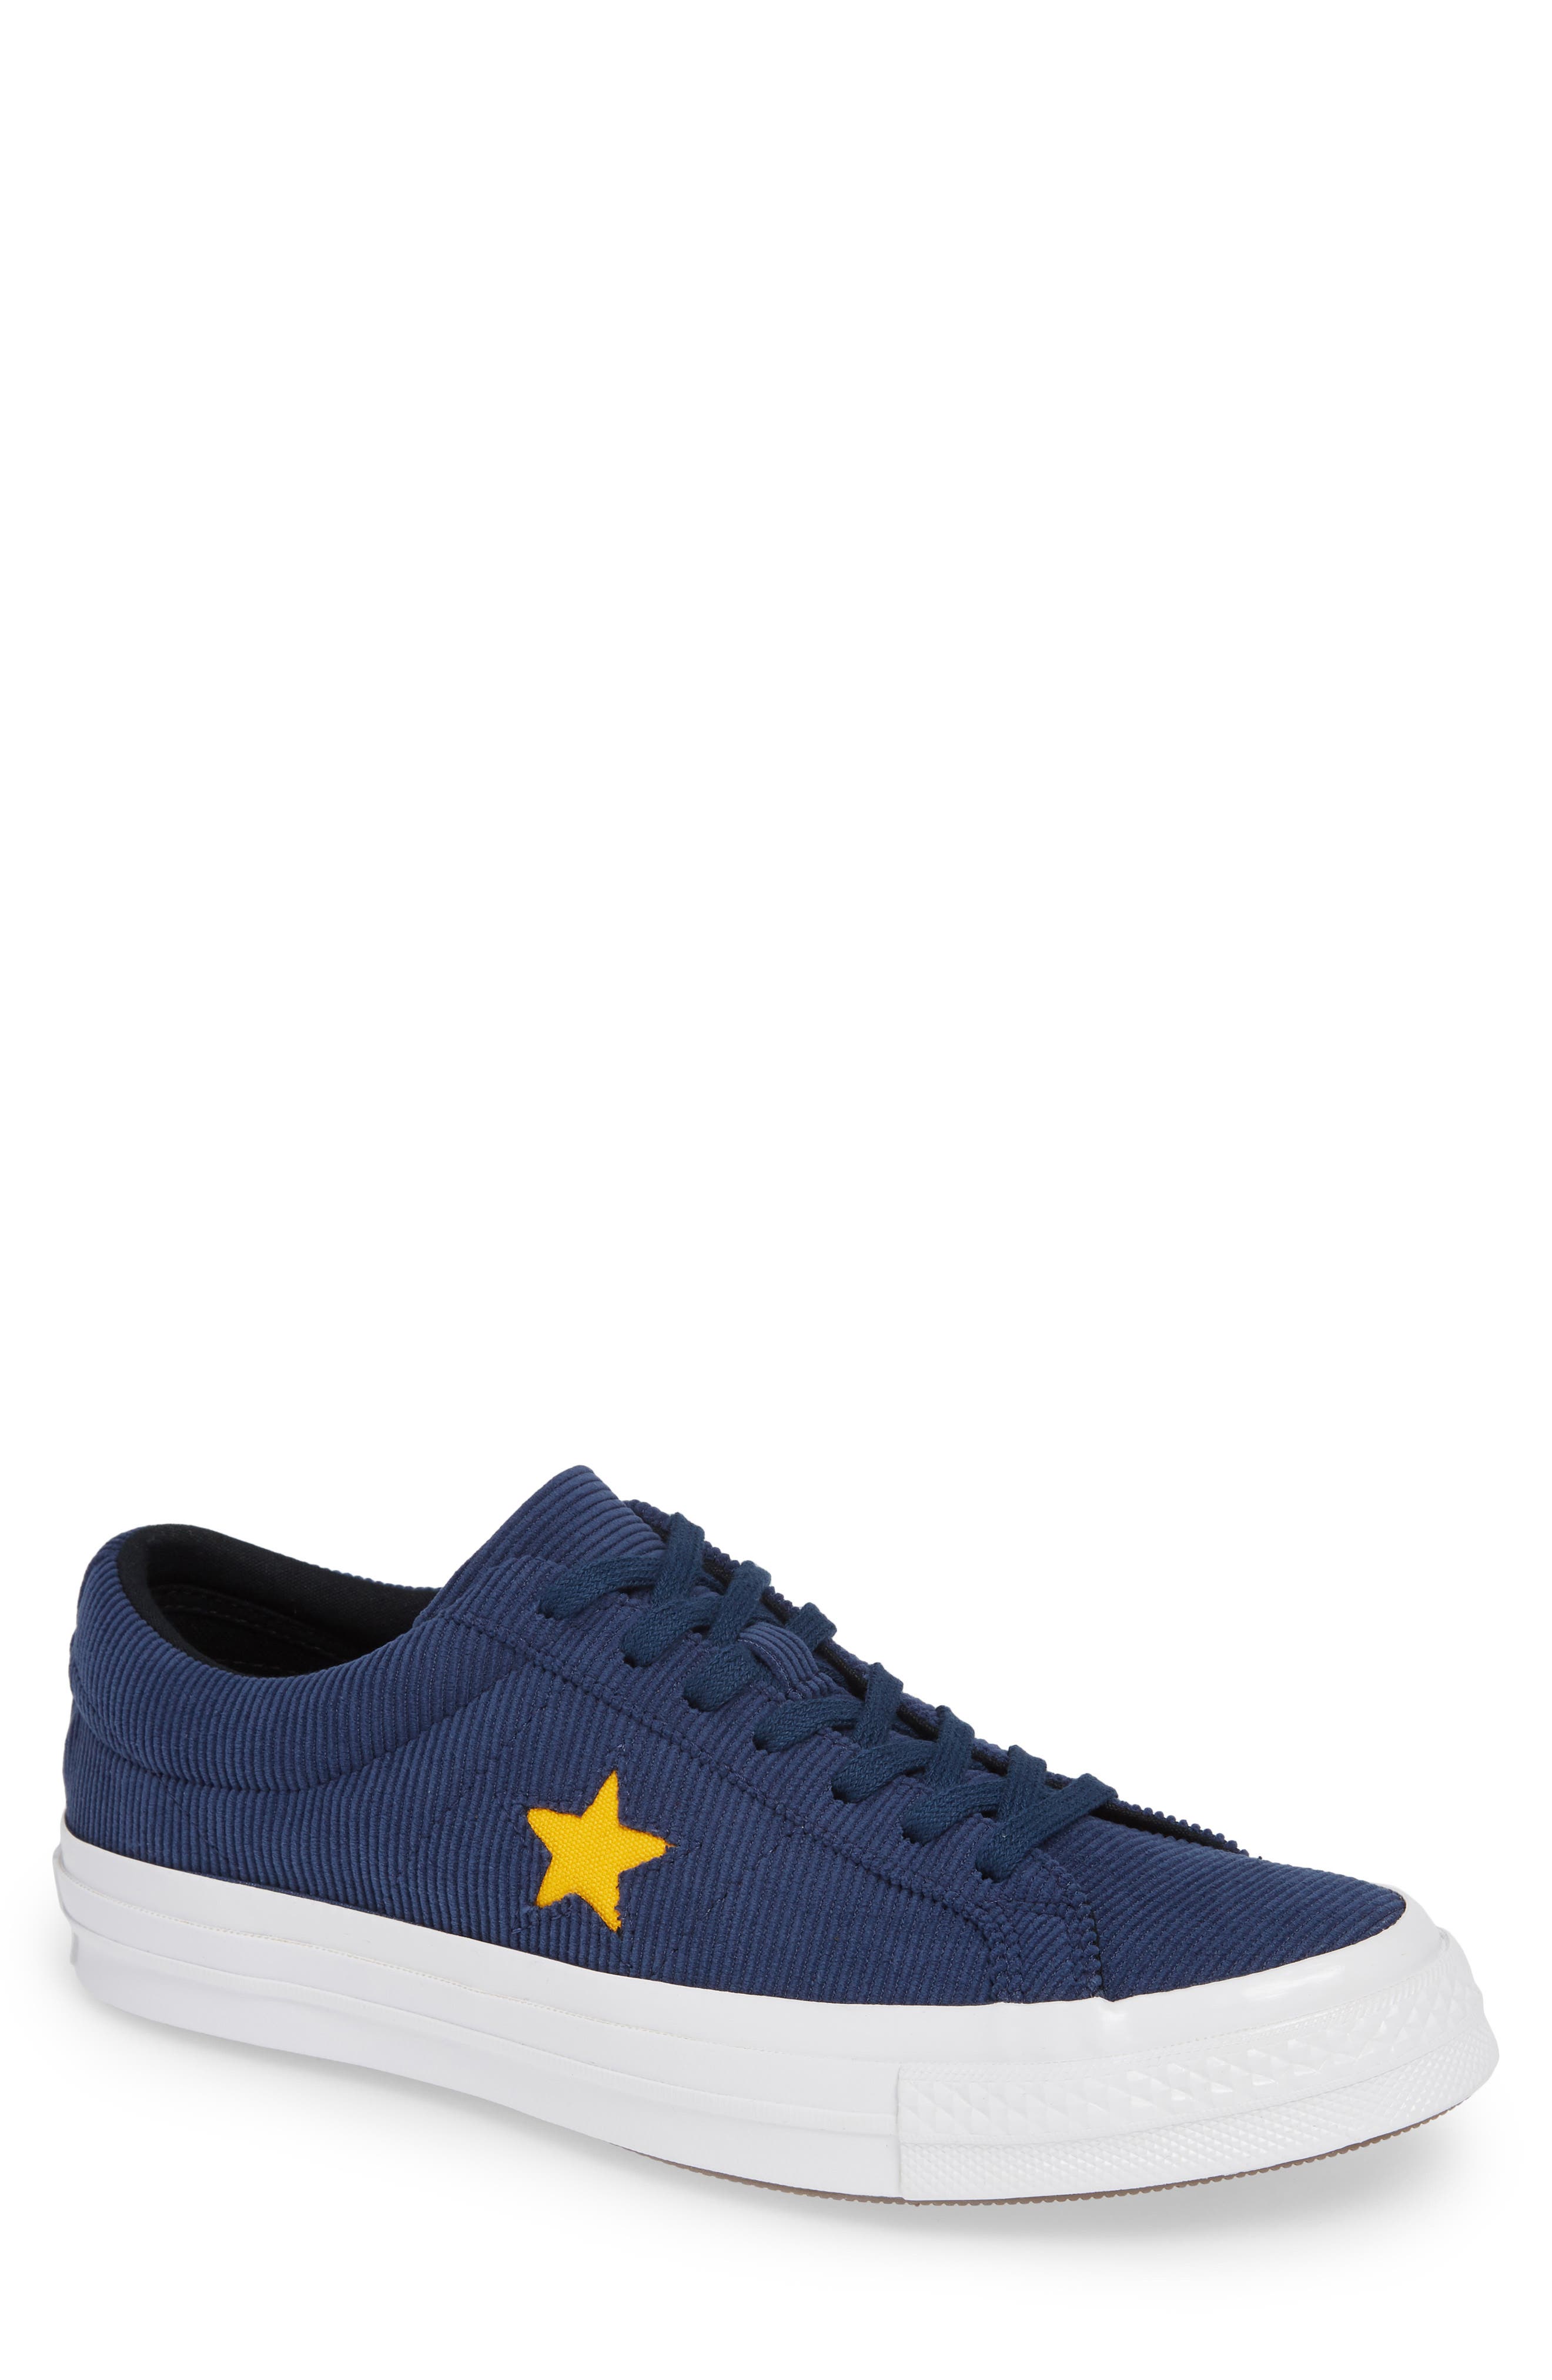 Converse One Star Corduroy Low Top 